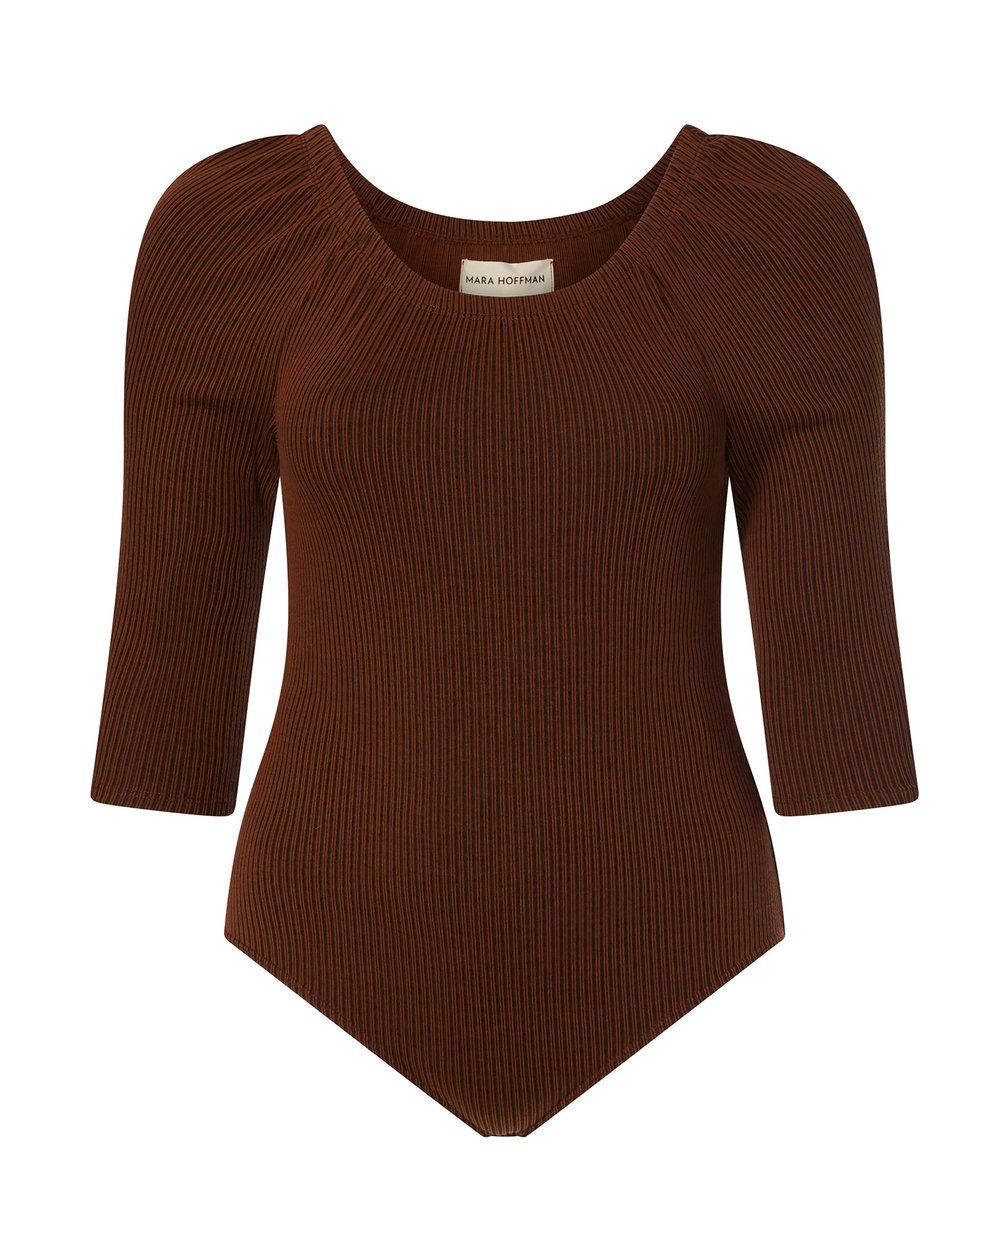 Brown Is Fall's Most Wearable Color Here Are Our Must-Have Pieces